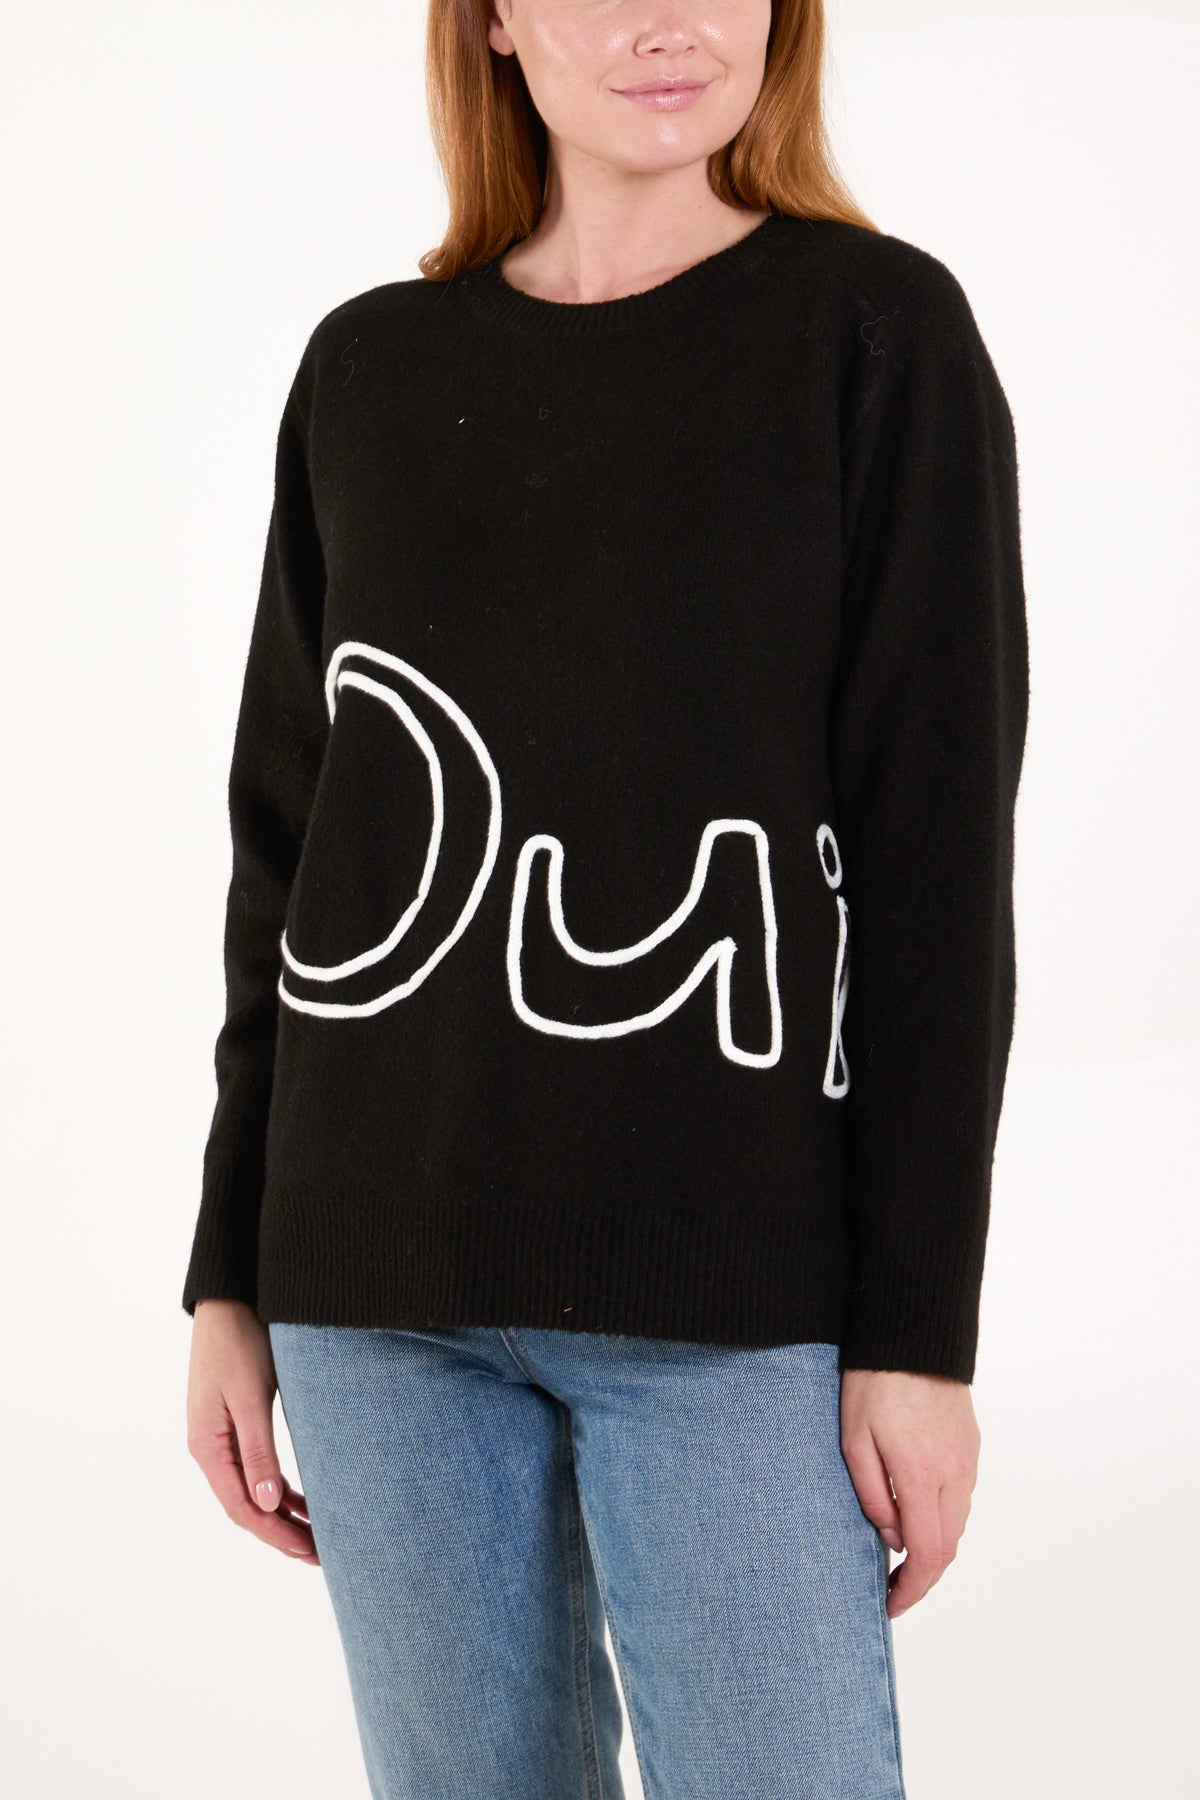 'Oui' & 'Yes' Embroidery Jumper